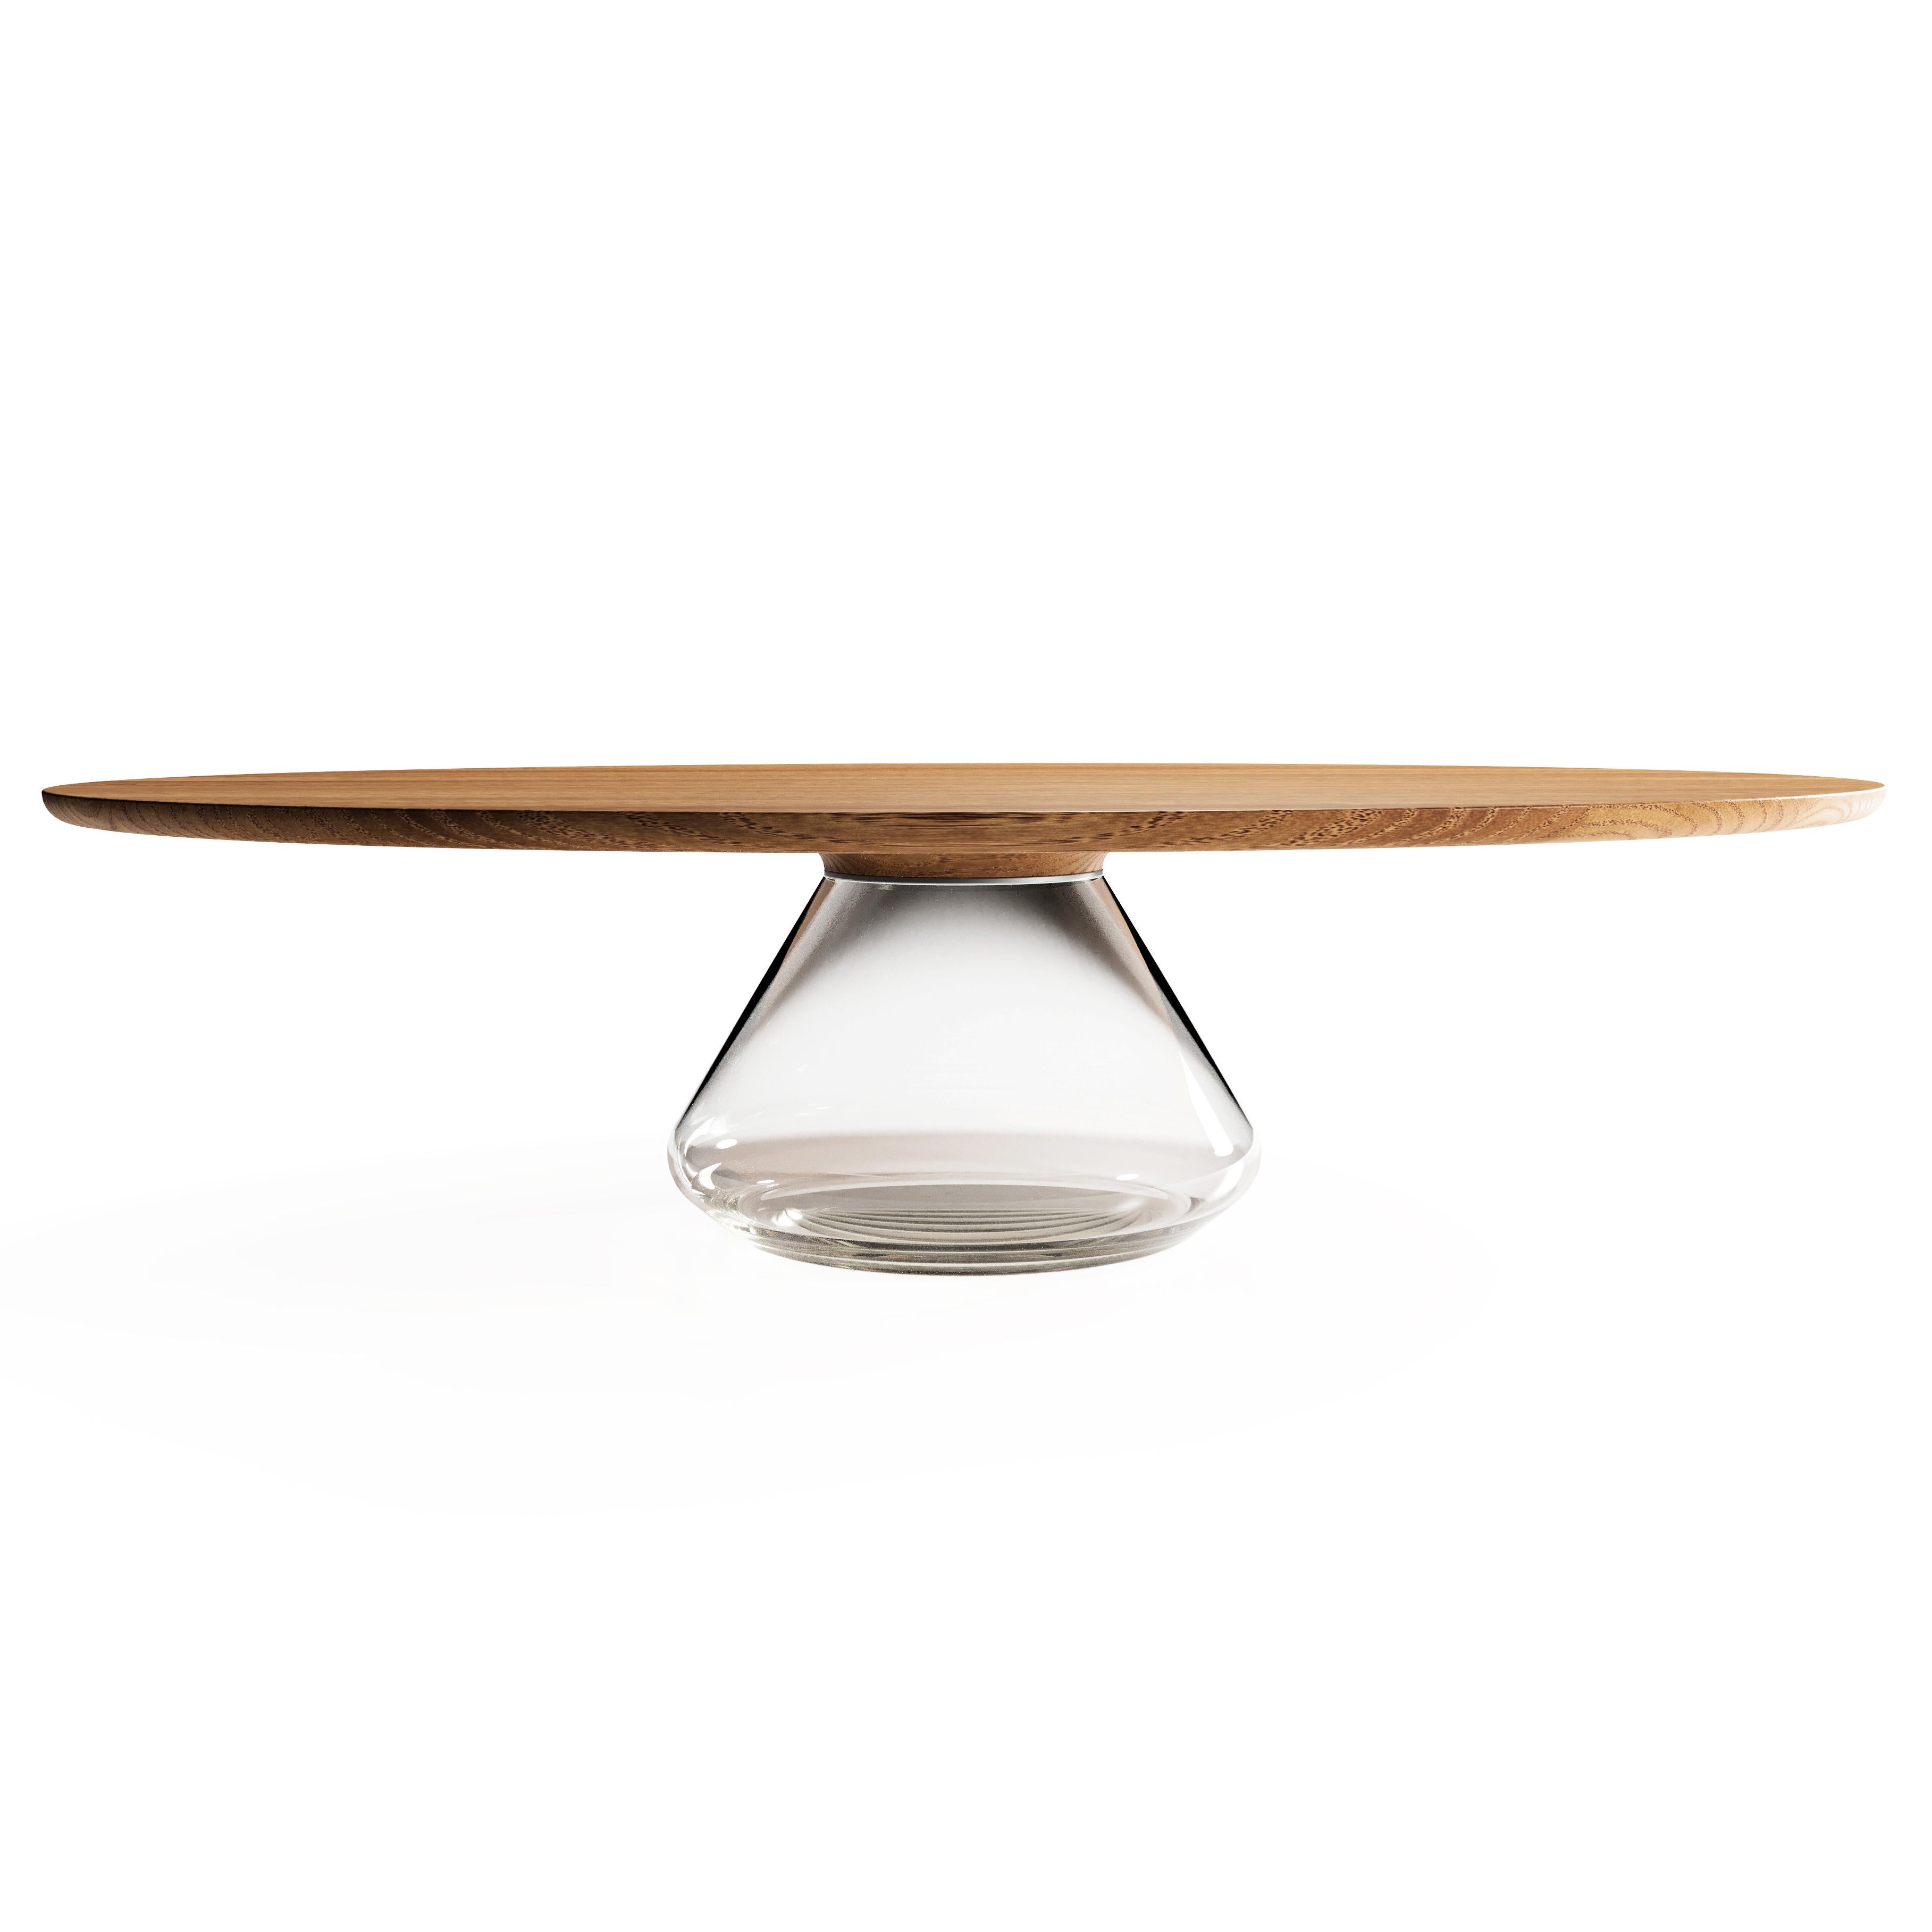 The Eclipse I, limited edition coffee table by Grzegorz Majka
Limited Edition of 8
Dimensions: 54 x 48 x 14 in
Materials: Glass, oak

The total eclipse of every interior? With this amazing table everything is possible as with its Minimalist